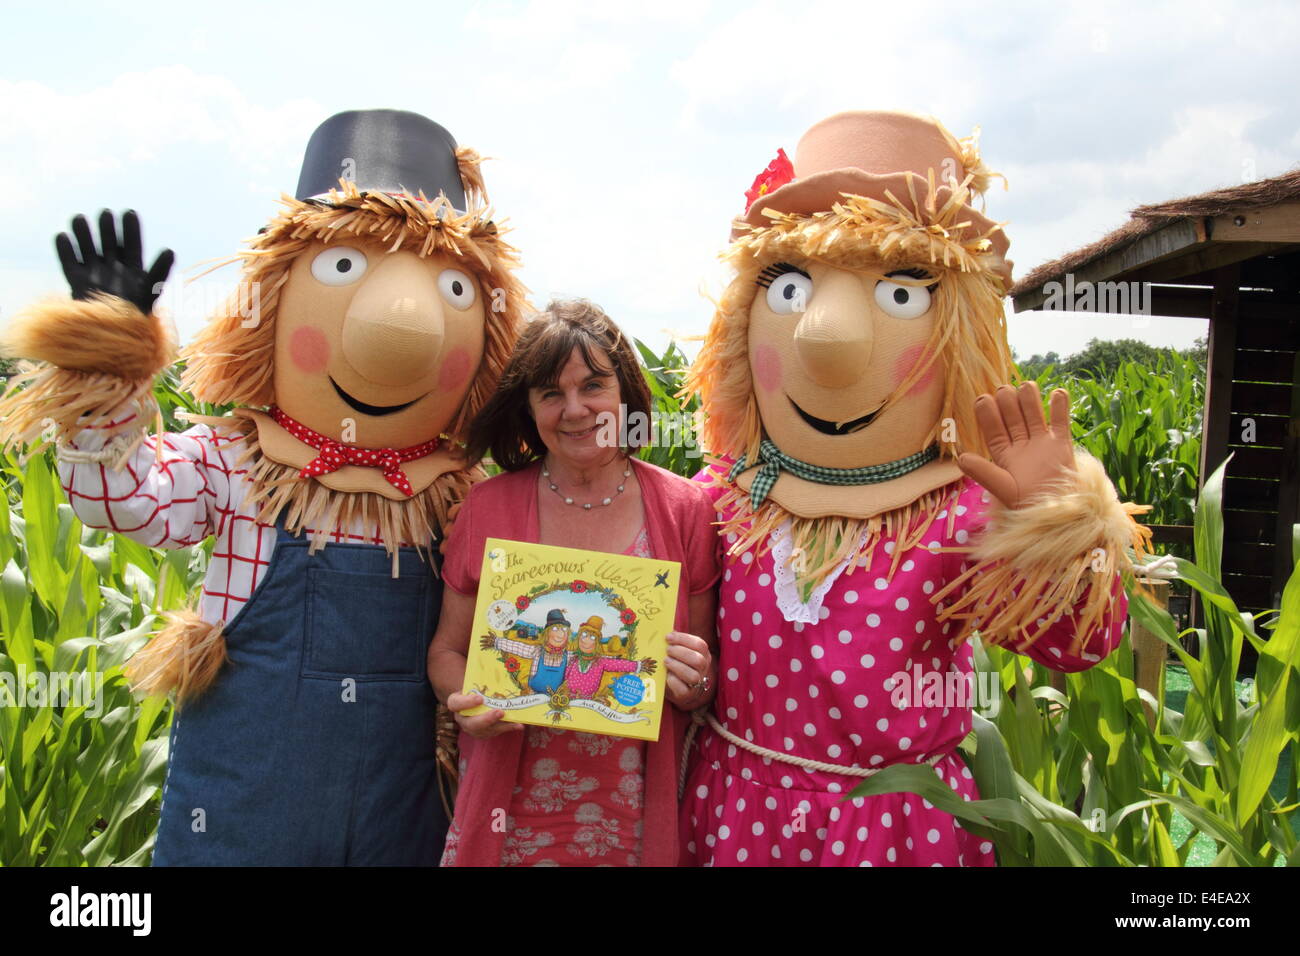 Burton-on-Trent, Staffordshire, UK. 9th July, 2014. Julia Donaldson with Harry O'Hay and Betty O'Barley. The National Forest Adventure Farm launches its 11th annual 10-acre maize maze that, this year, celebrates publication of The Scarecrows' Wedding book from the creators of The Gruffalo & Stick Man. Designed in the shape of The Scarecrows' Wedding characters Betty O'Barley and Harry O'Hay, the maze features three miles of pathways, bridges & viewing towers. Credit:  Deborah Vernon/Alamy Live News Stock Photo